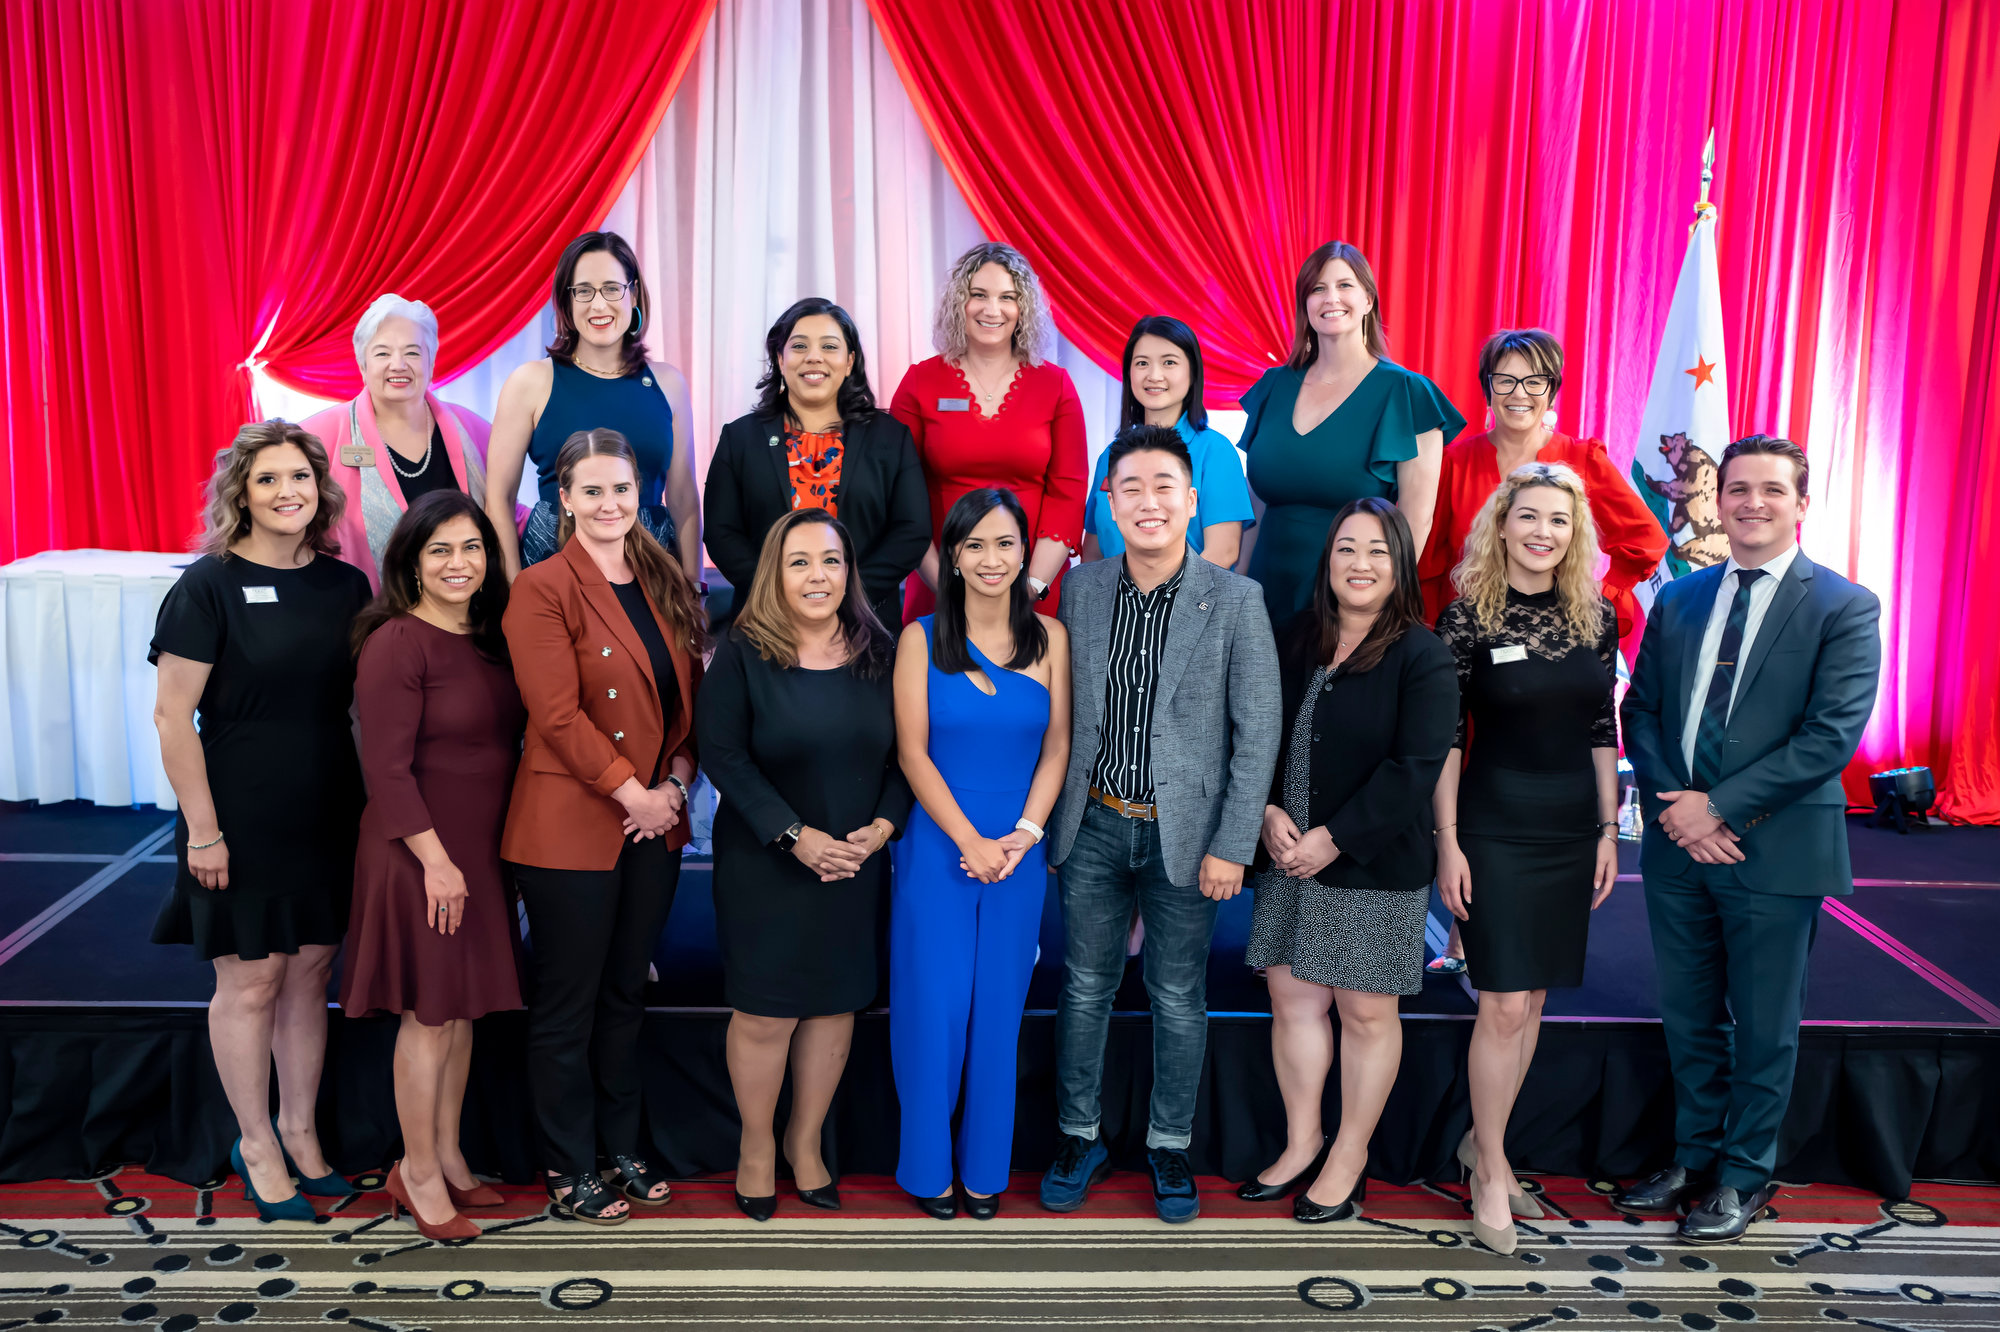 City of Buena Park council member, the Hon. Susan Sonne (top left), installed the 2023-24 Chamber Executive and Board Members on June 22, 2023.